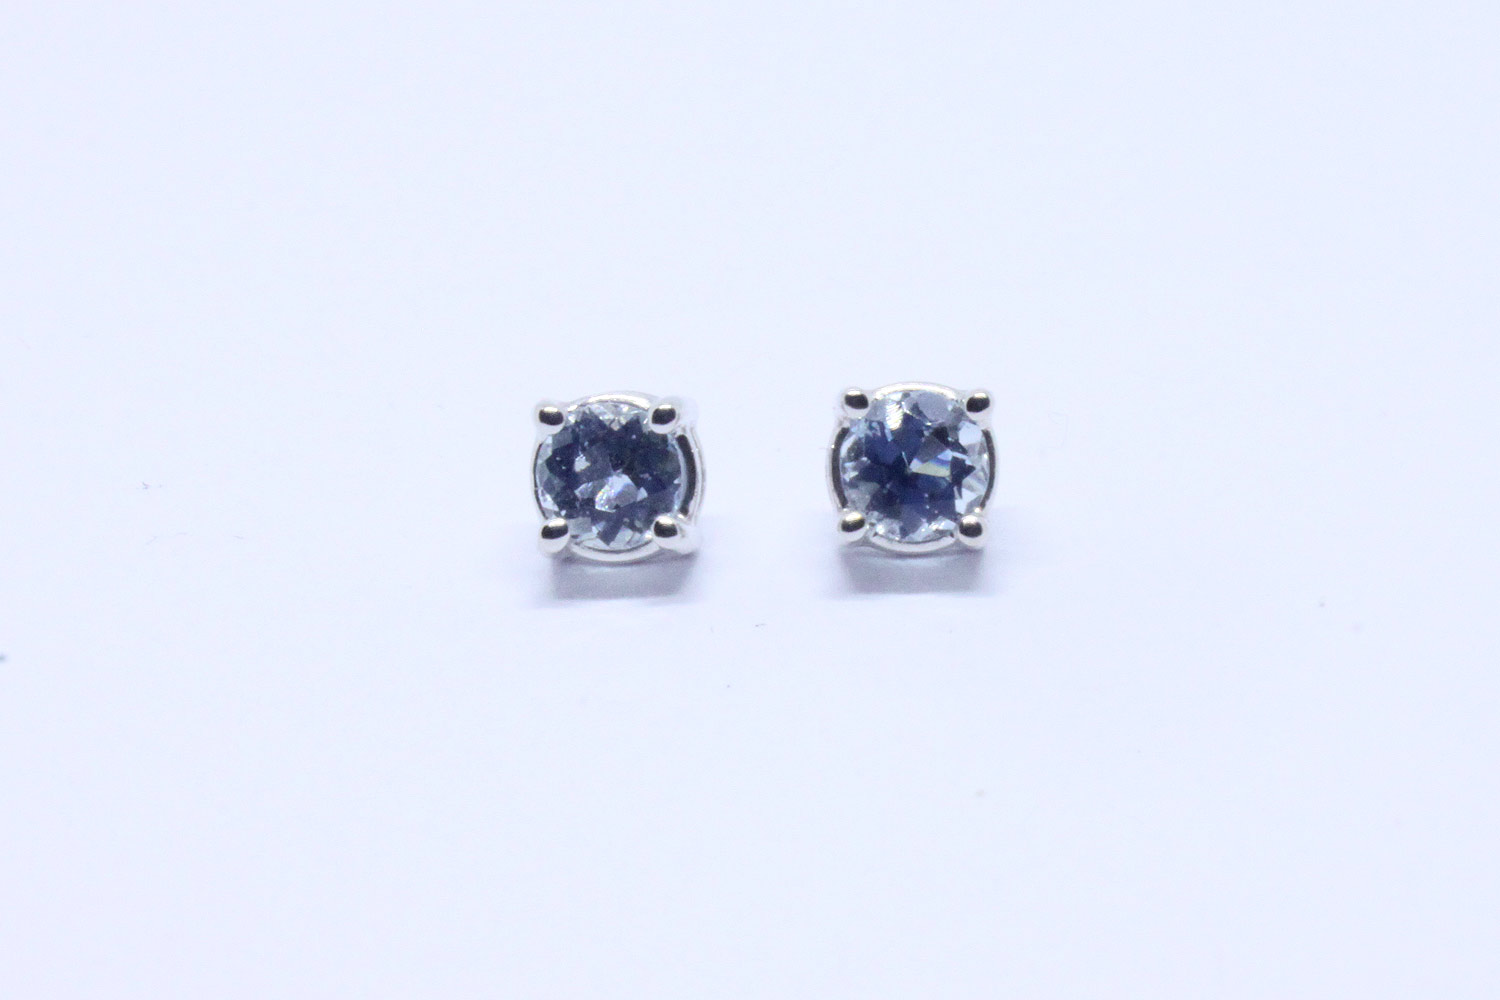 White gold earrings with acquemarine brilliant cut